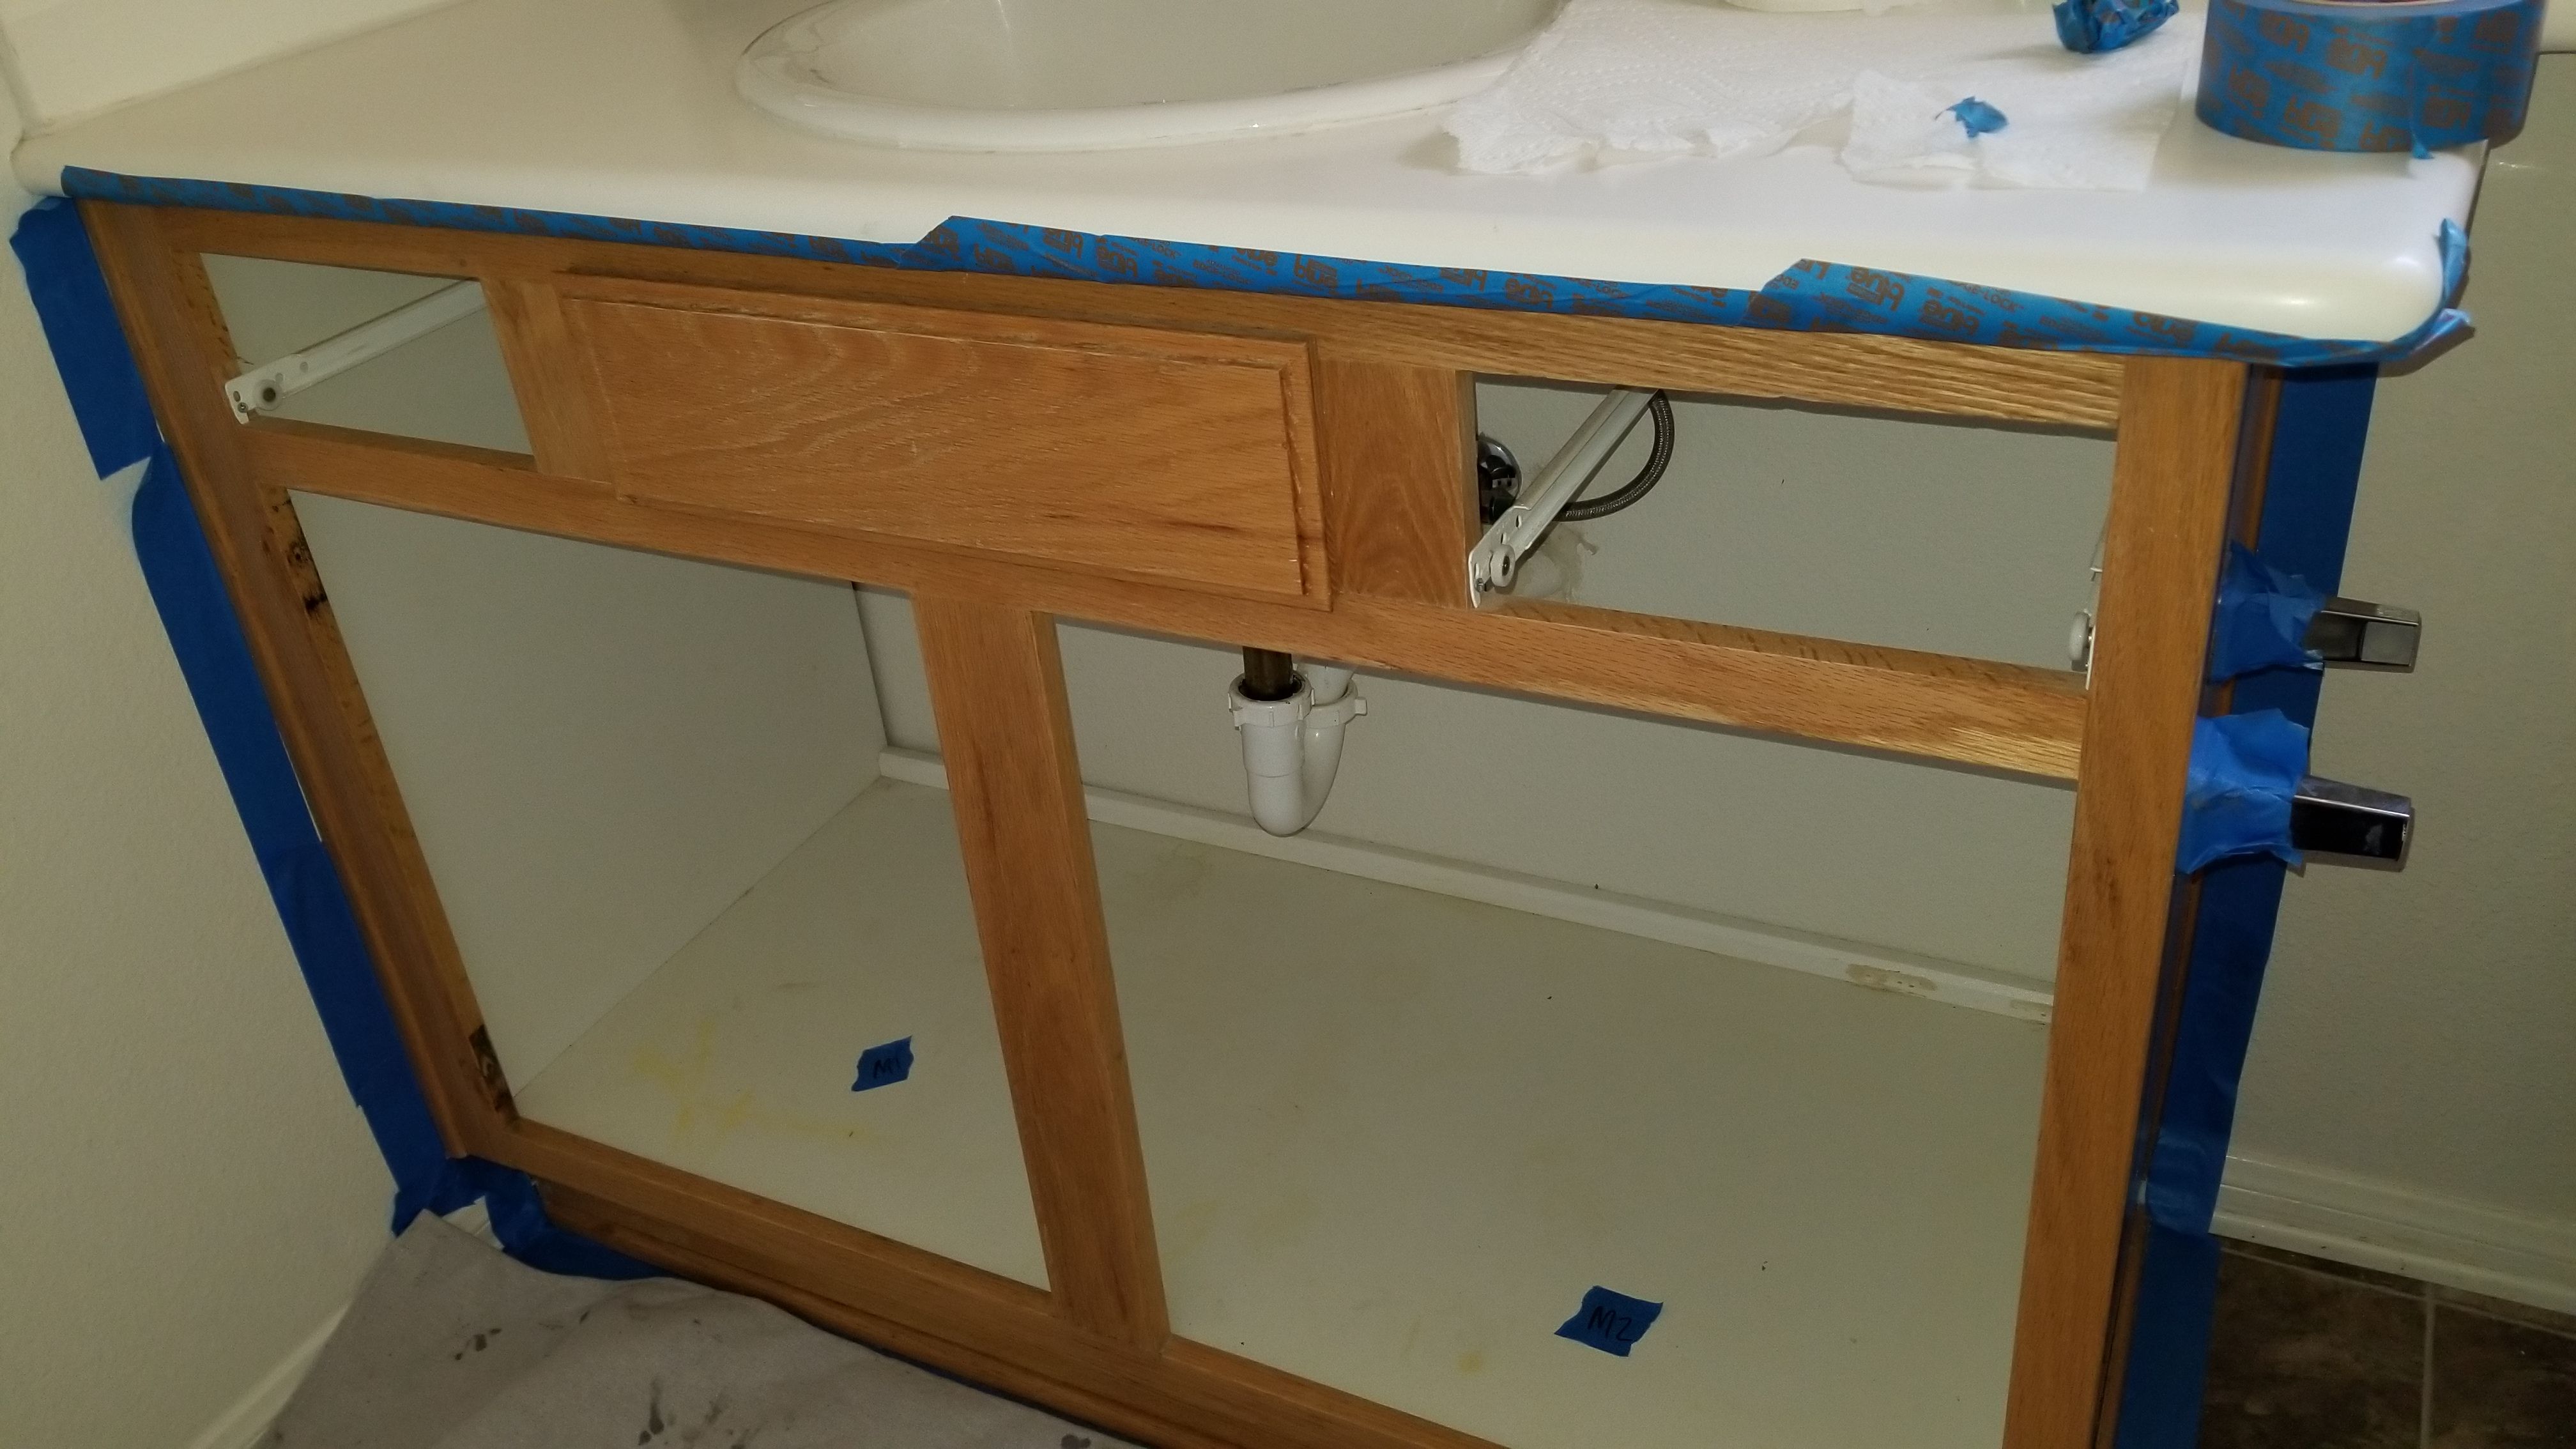 More Cabinet Transformations Steemit